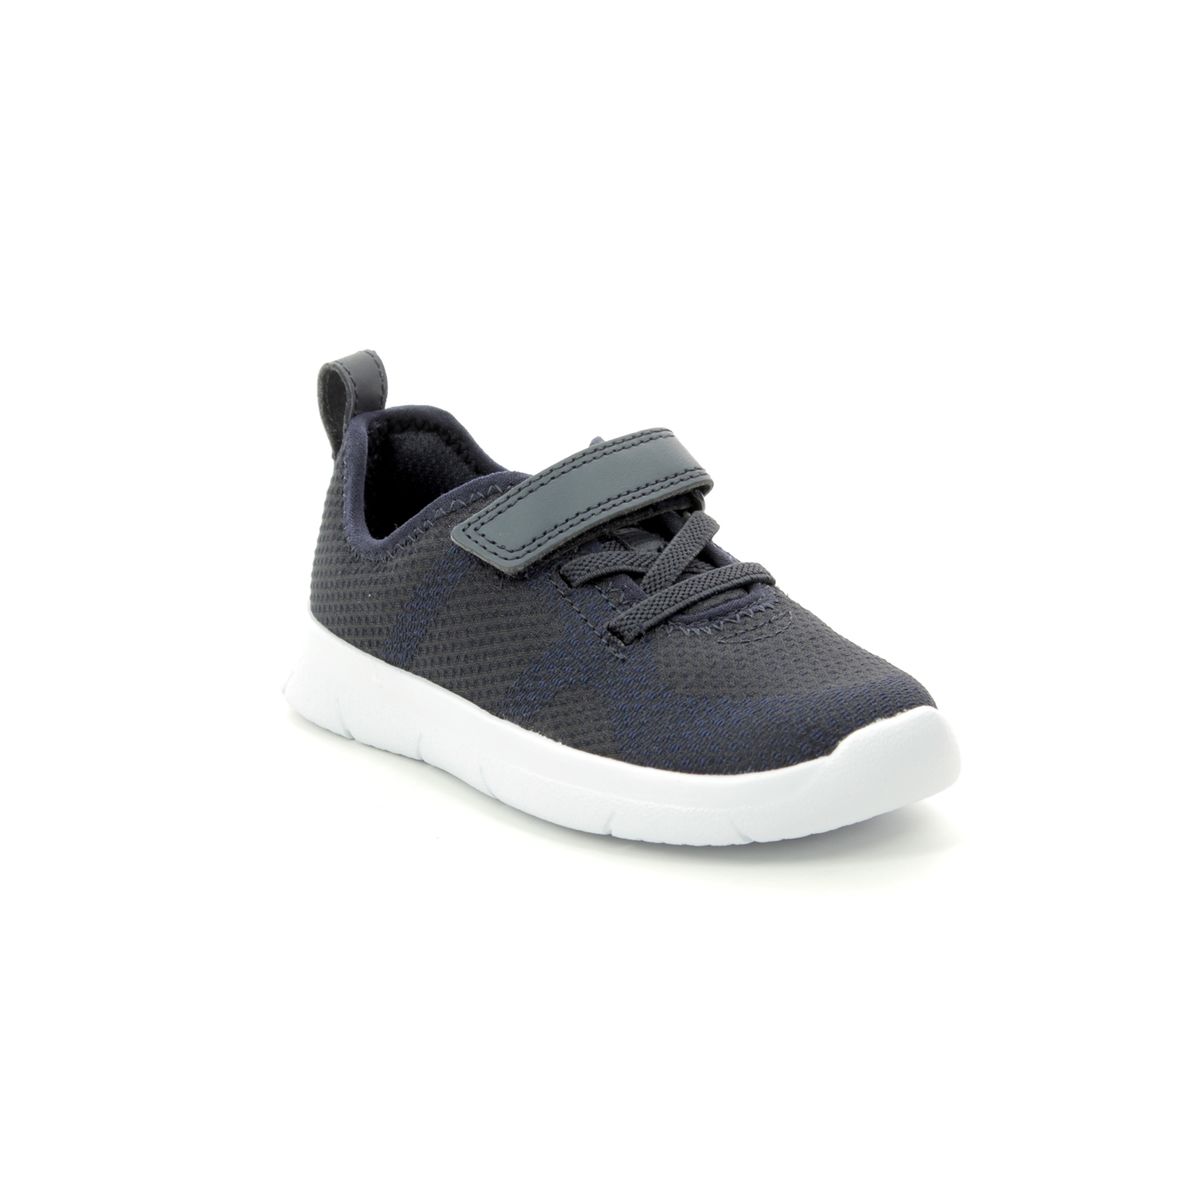 Clarks Ath Flux T Navy Kids Toddler Boys Trainers 412696F In Size 9 In Plain Navy F Width Fitting Regular Fit For kids